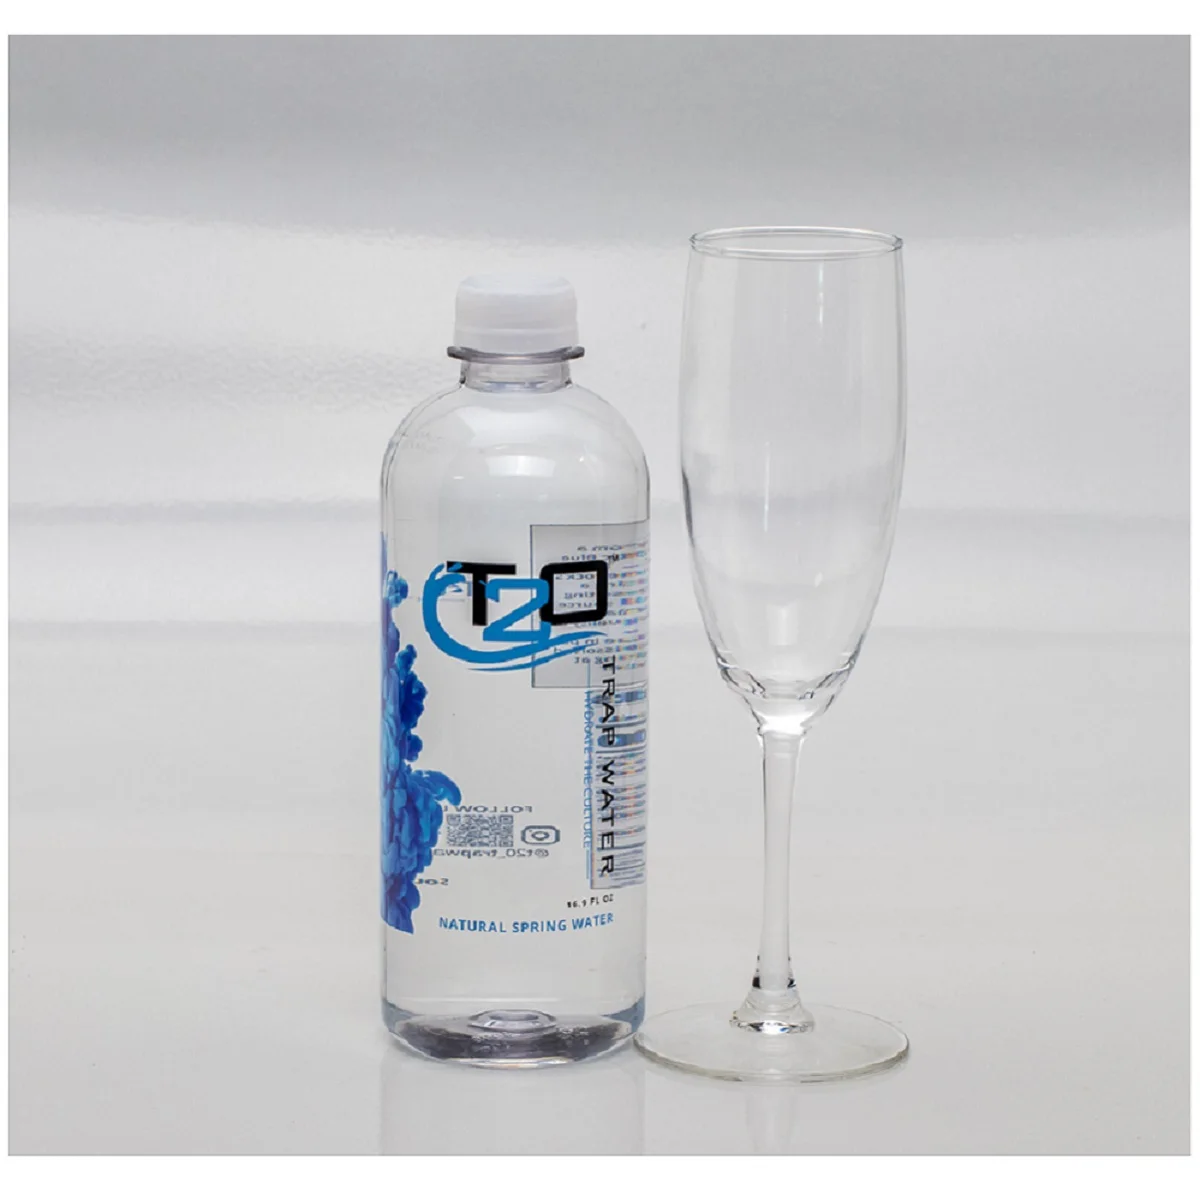 Naturally Occurring Purest Spring Water Source T20 Trap Water 16.9 FL OZ & 20 FL OZ MADE in USA (10000002900413)